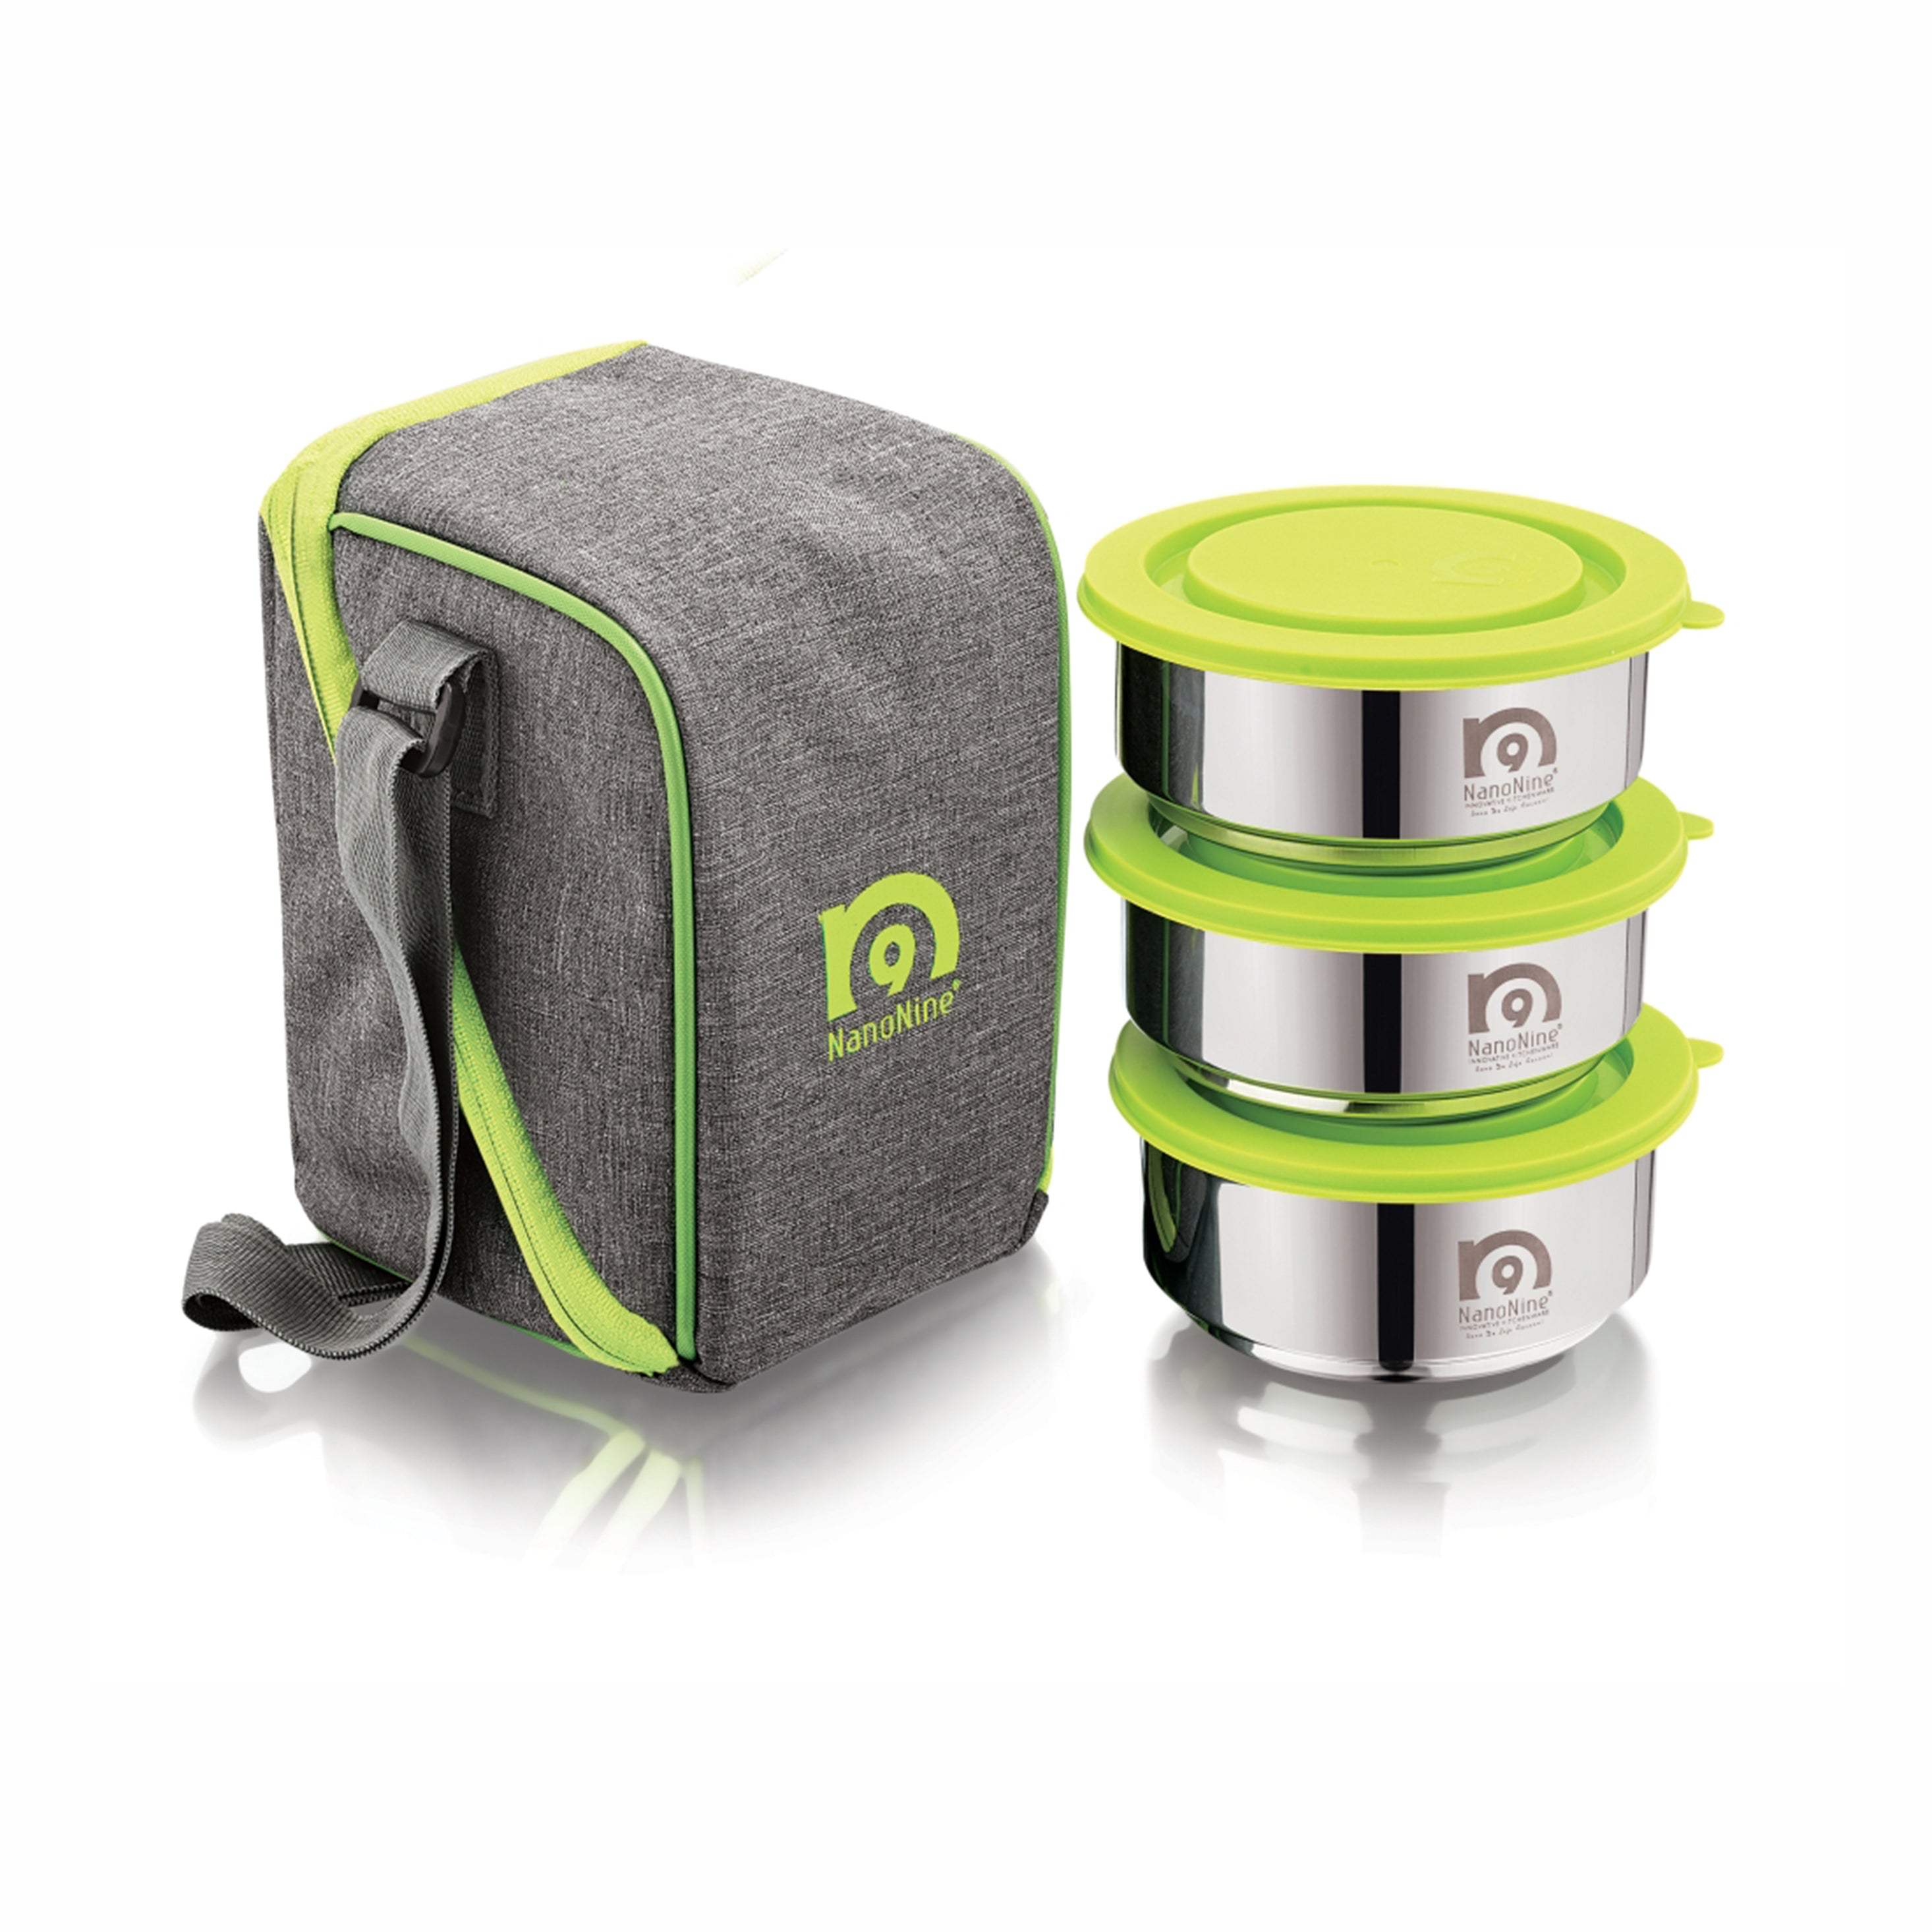 NanoNine Tiffiny Small Pro 375 ml X 3 Double Wall Insulated Stainless Steel Lunch Box.